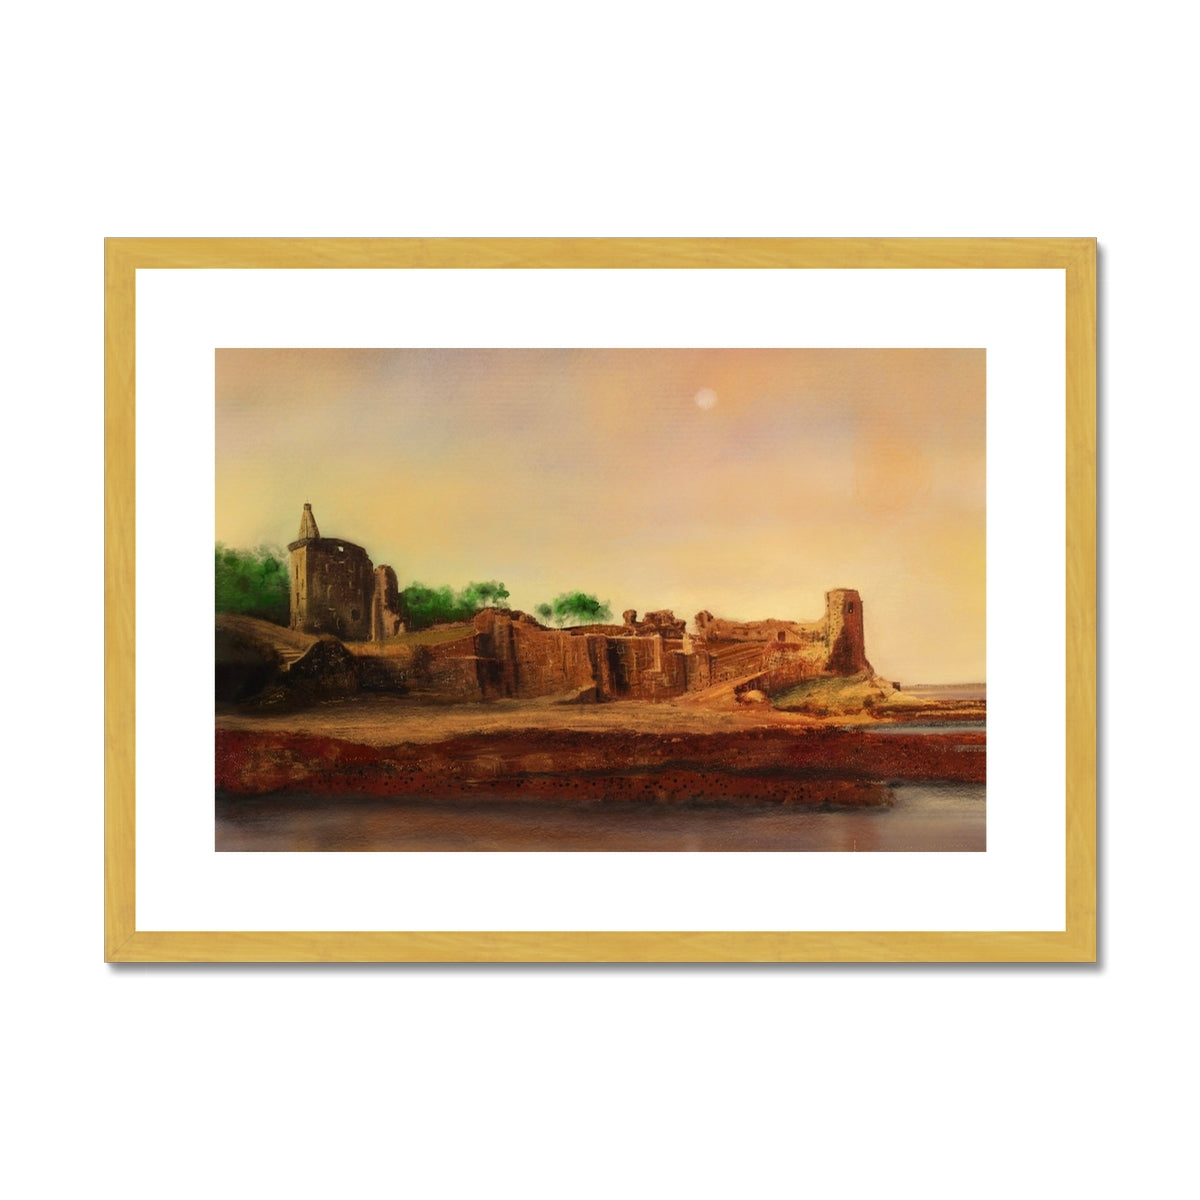 St Andrews Castle Painting | Antique Framed & Mounted Prints From Scotland-Antique Framed & Mounted Prints-Historic & Iconic Scotland Art Gallery-A2 Landscape-Gold Frame-Paintings, Prints, Homeware, Art Gifts From Scotland By Scottish Artist Kevin Hunter